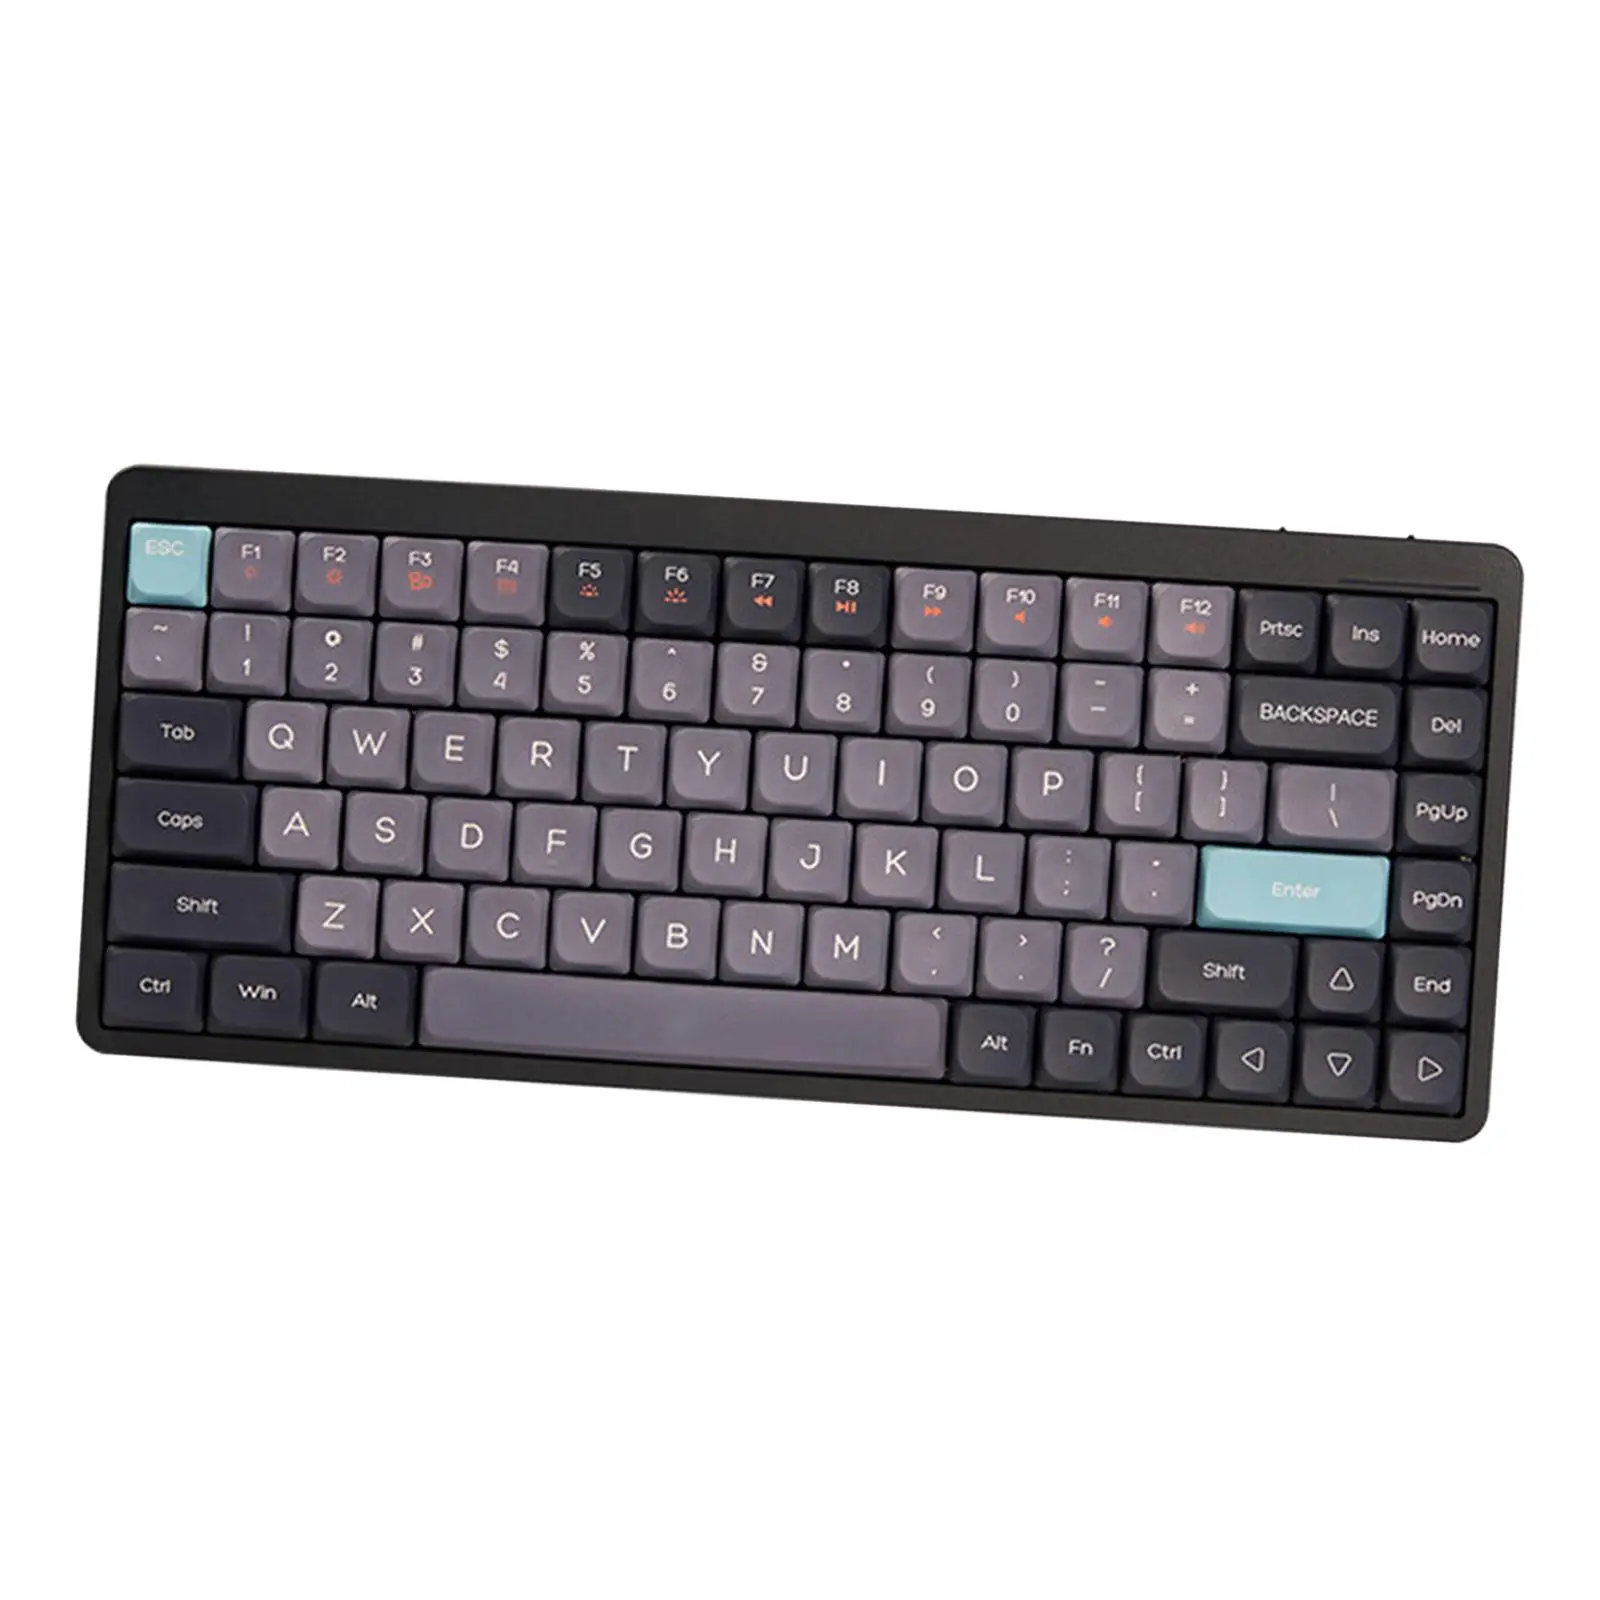 Mechanical Gaming Keyboard Brightness Adjustable Durable Wired USB RGB Backlight Ultra thin computer Keyboard Yk75 for Laptop PC